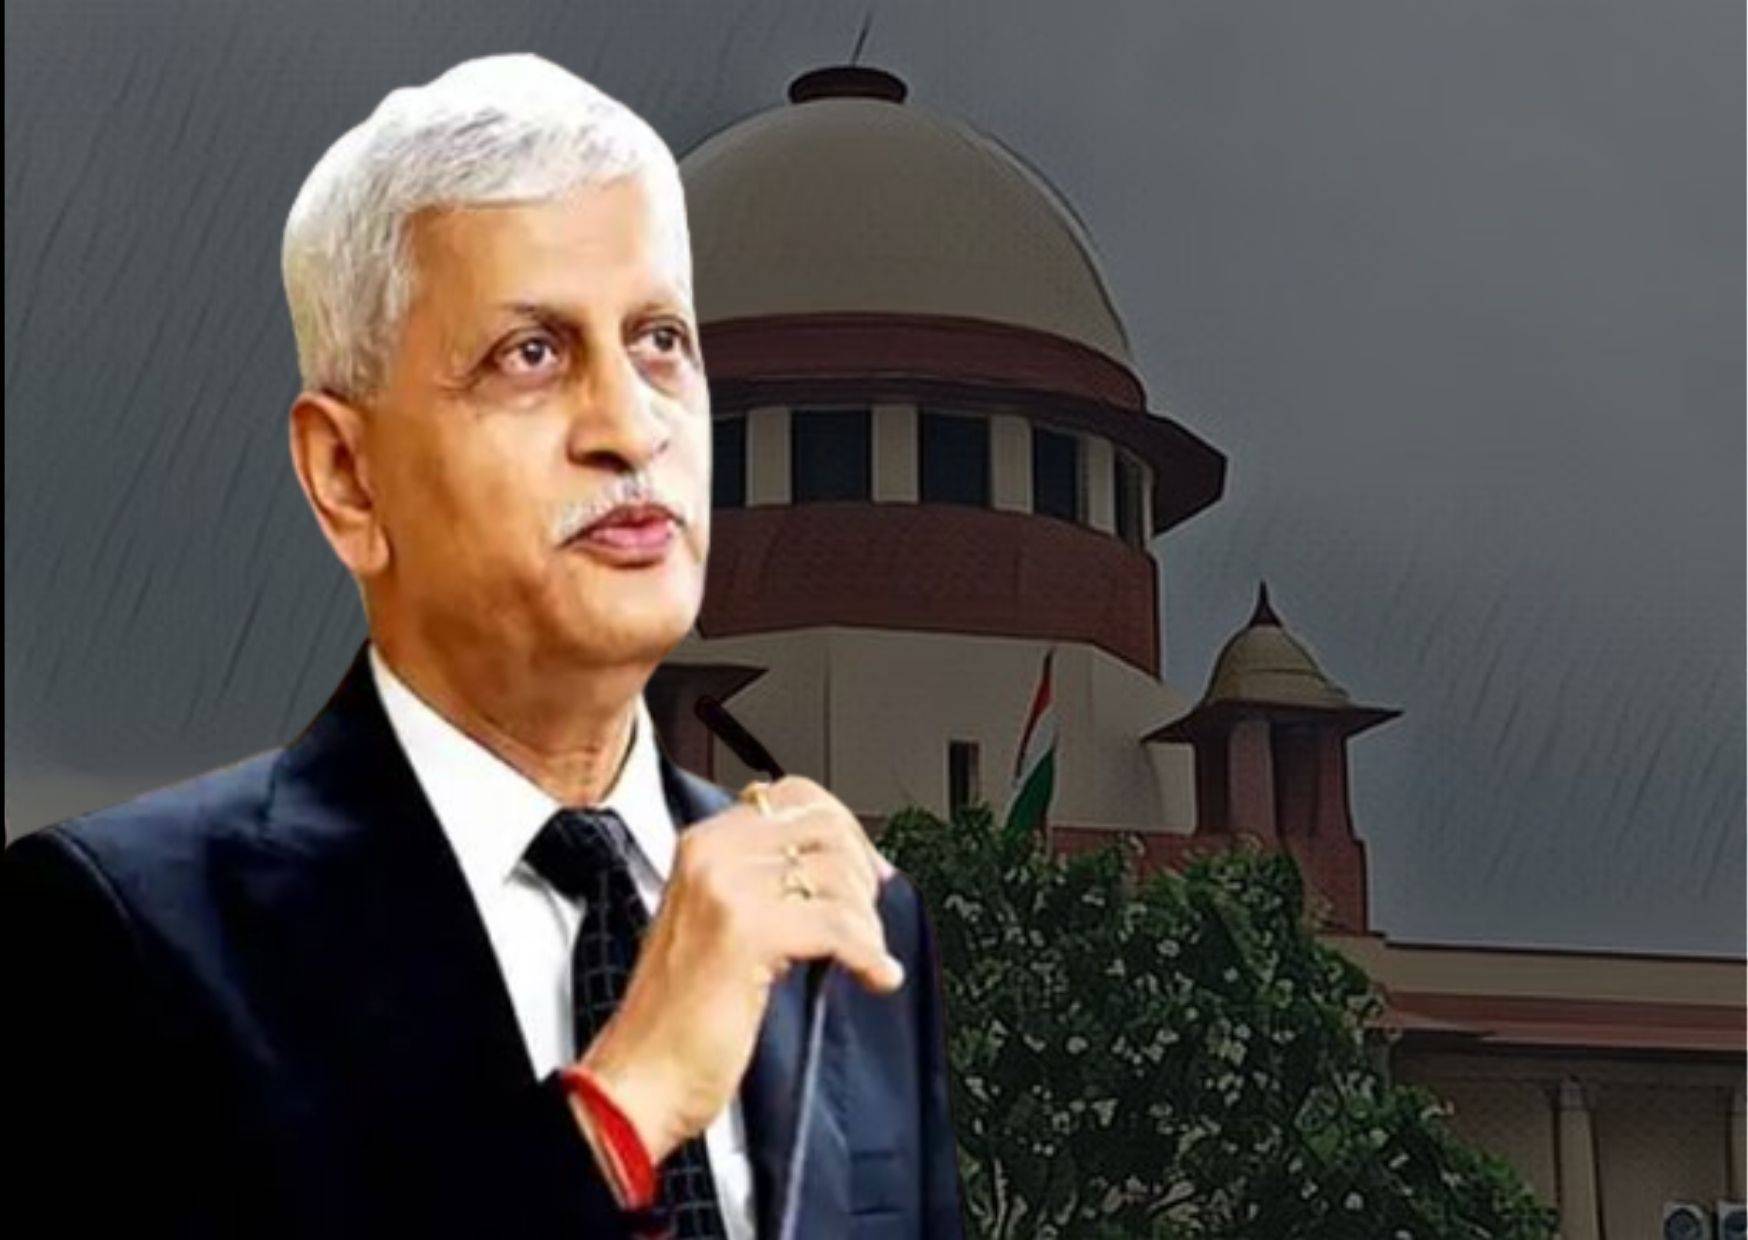 Justice Uday Umesh Lalit appointed as 49th Chief Justice of India